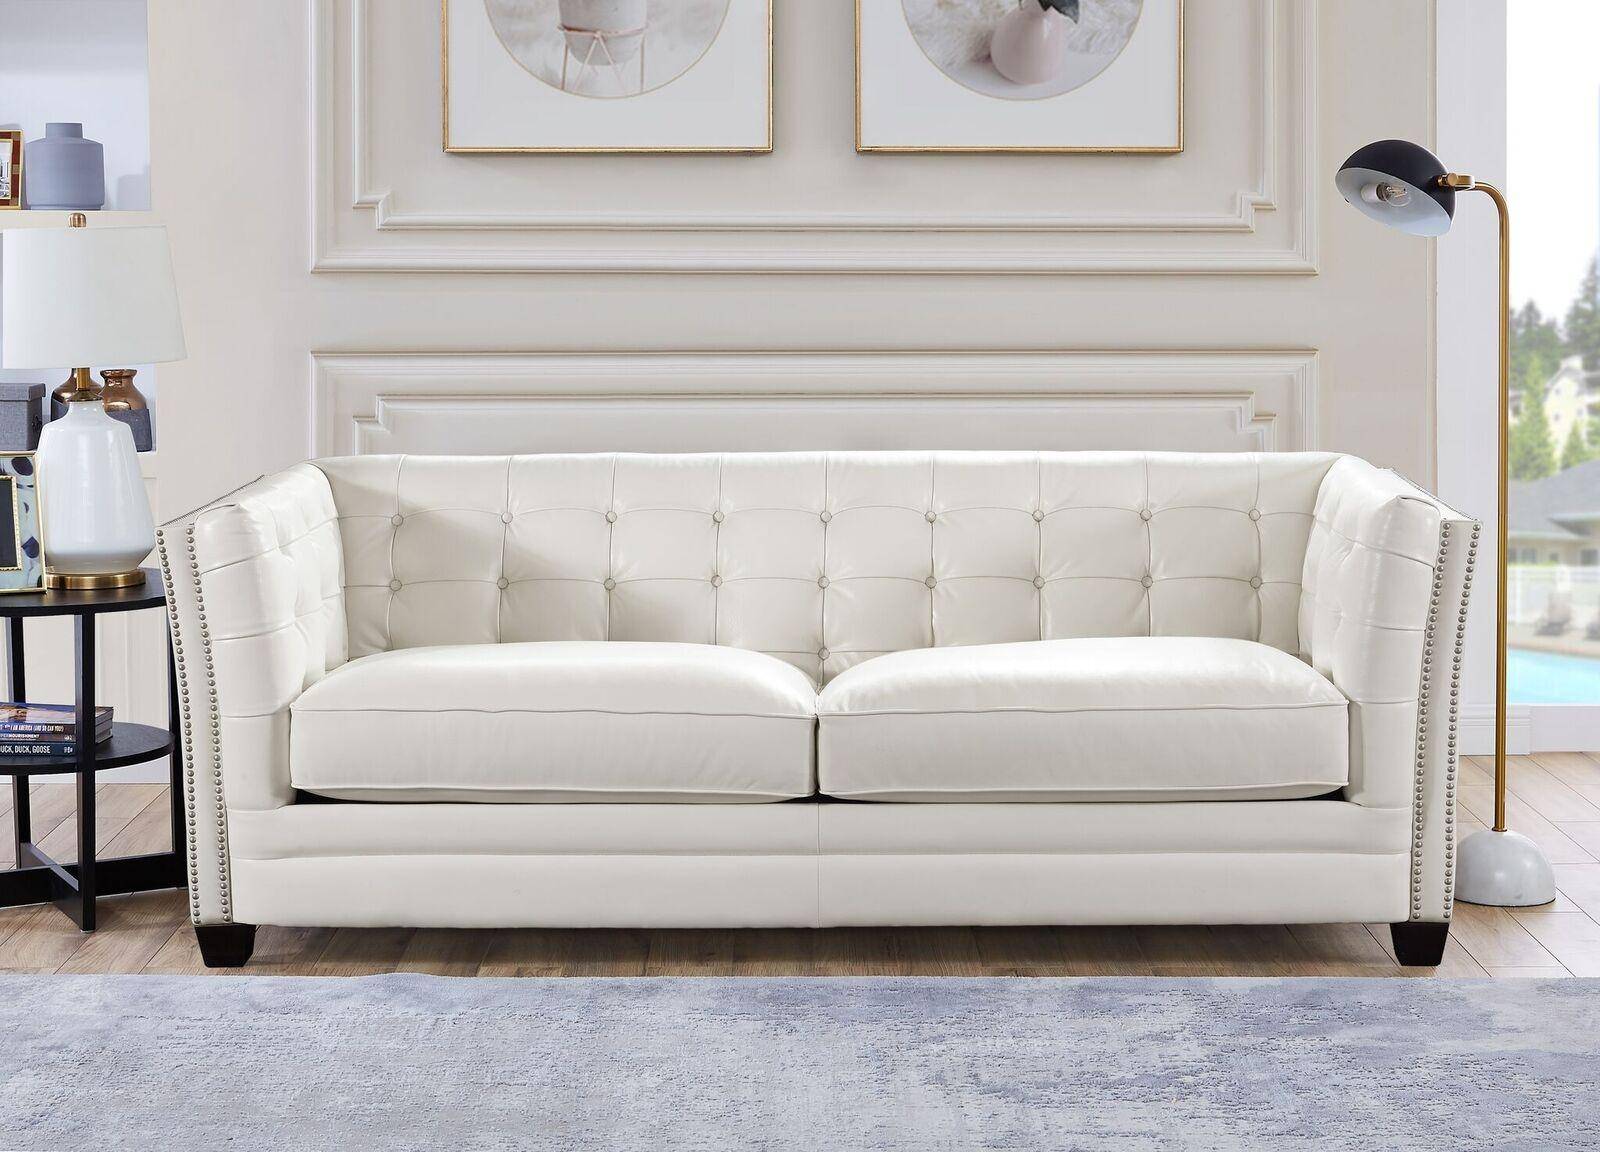 off white sofa brown leather chair